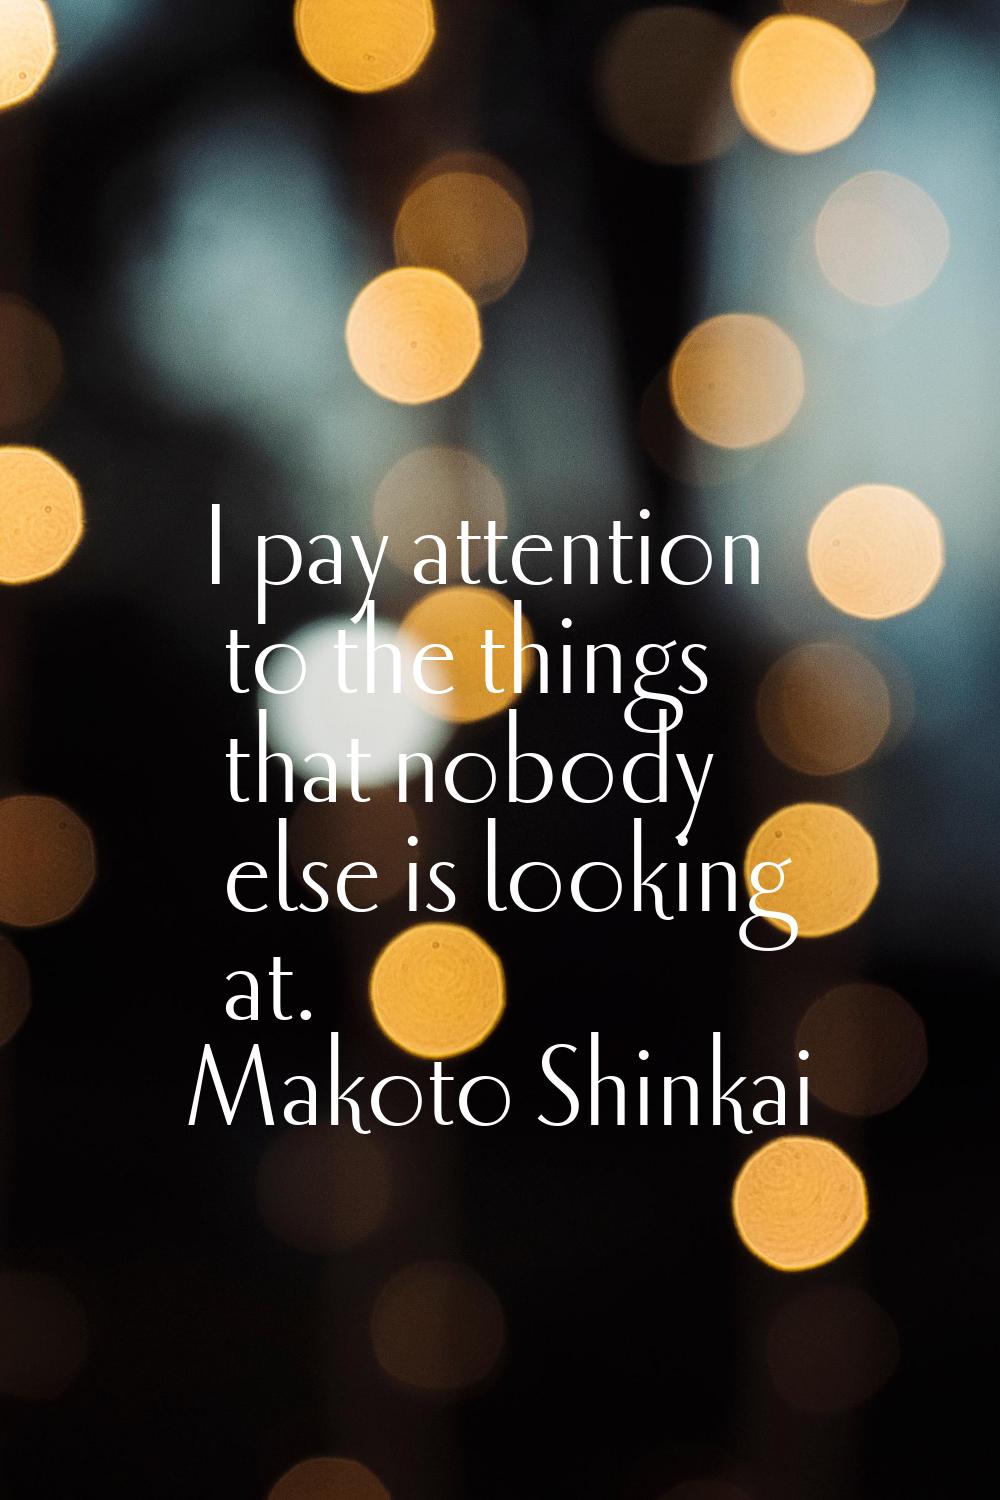 I pay attention to the things that nobody else is looking at.